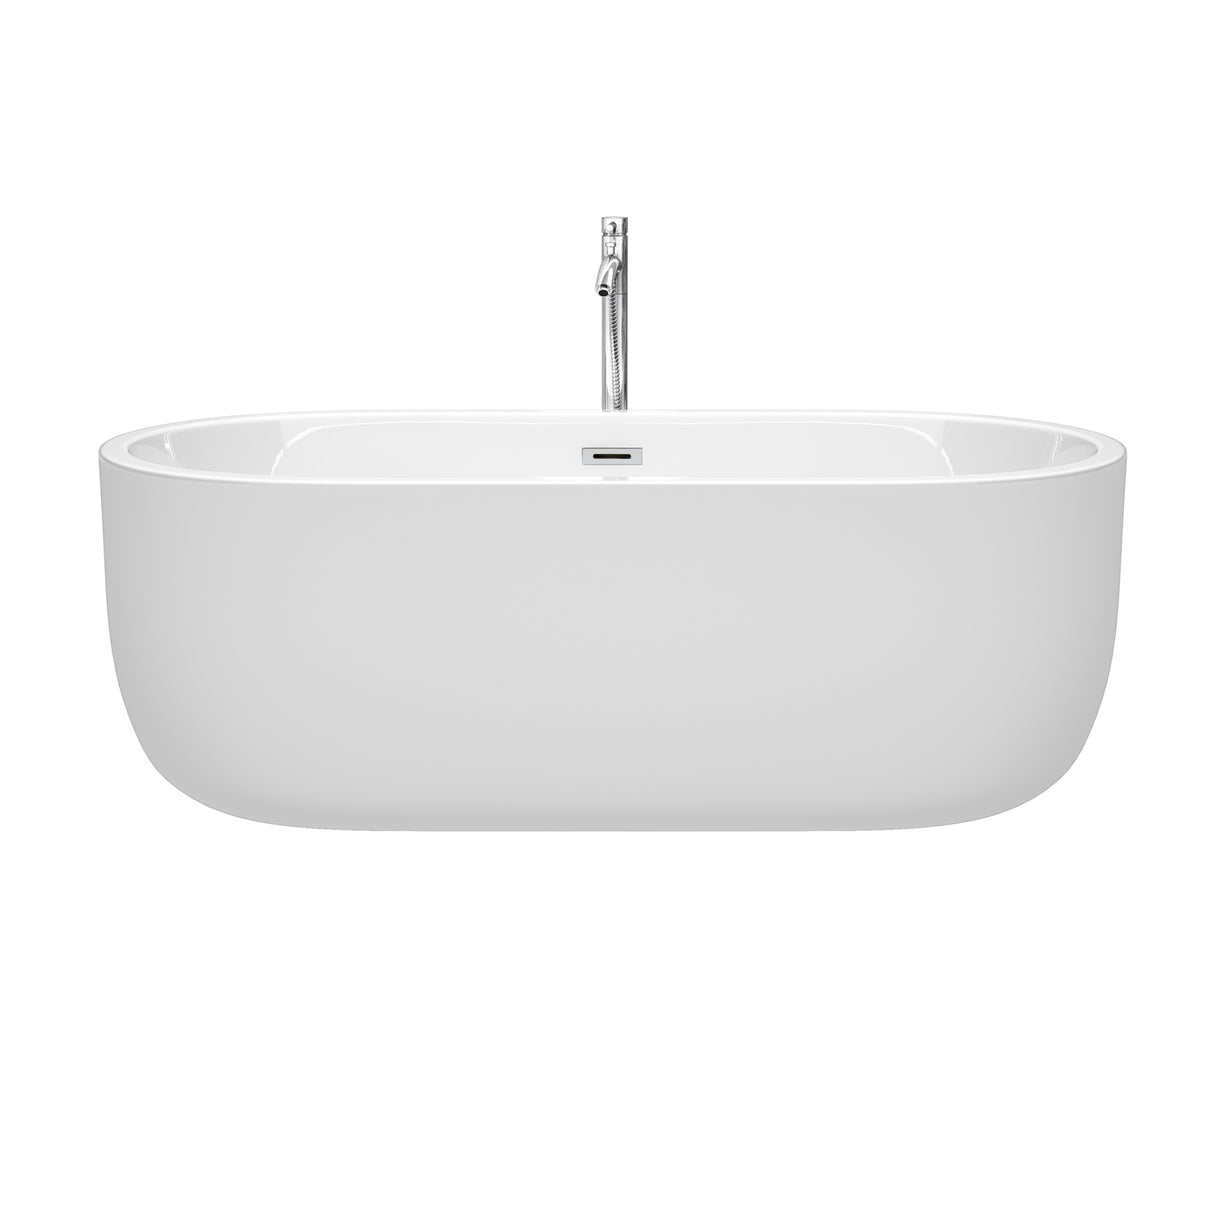 Juliette 67 Inch Freestanding Bathtub in White with Floor Mounted Faucet Drain and Overflow Trim in Polished Chrome